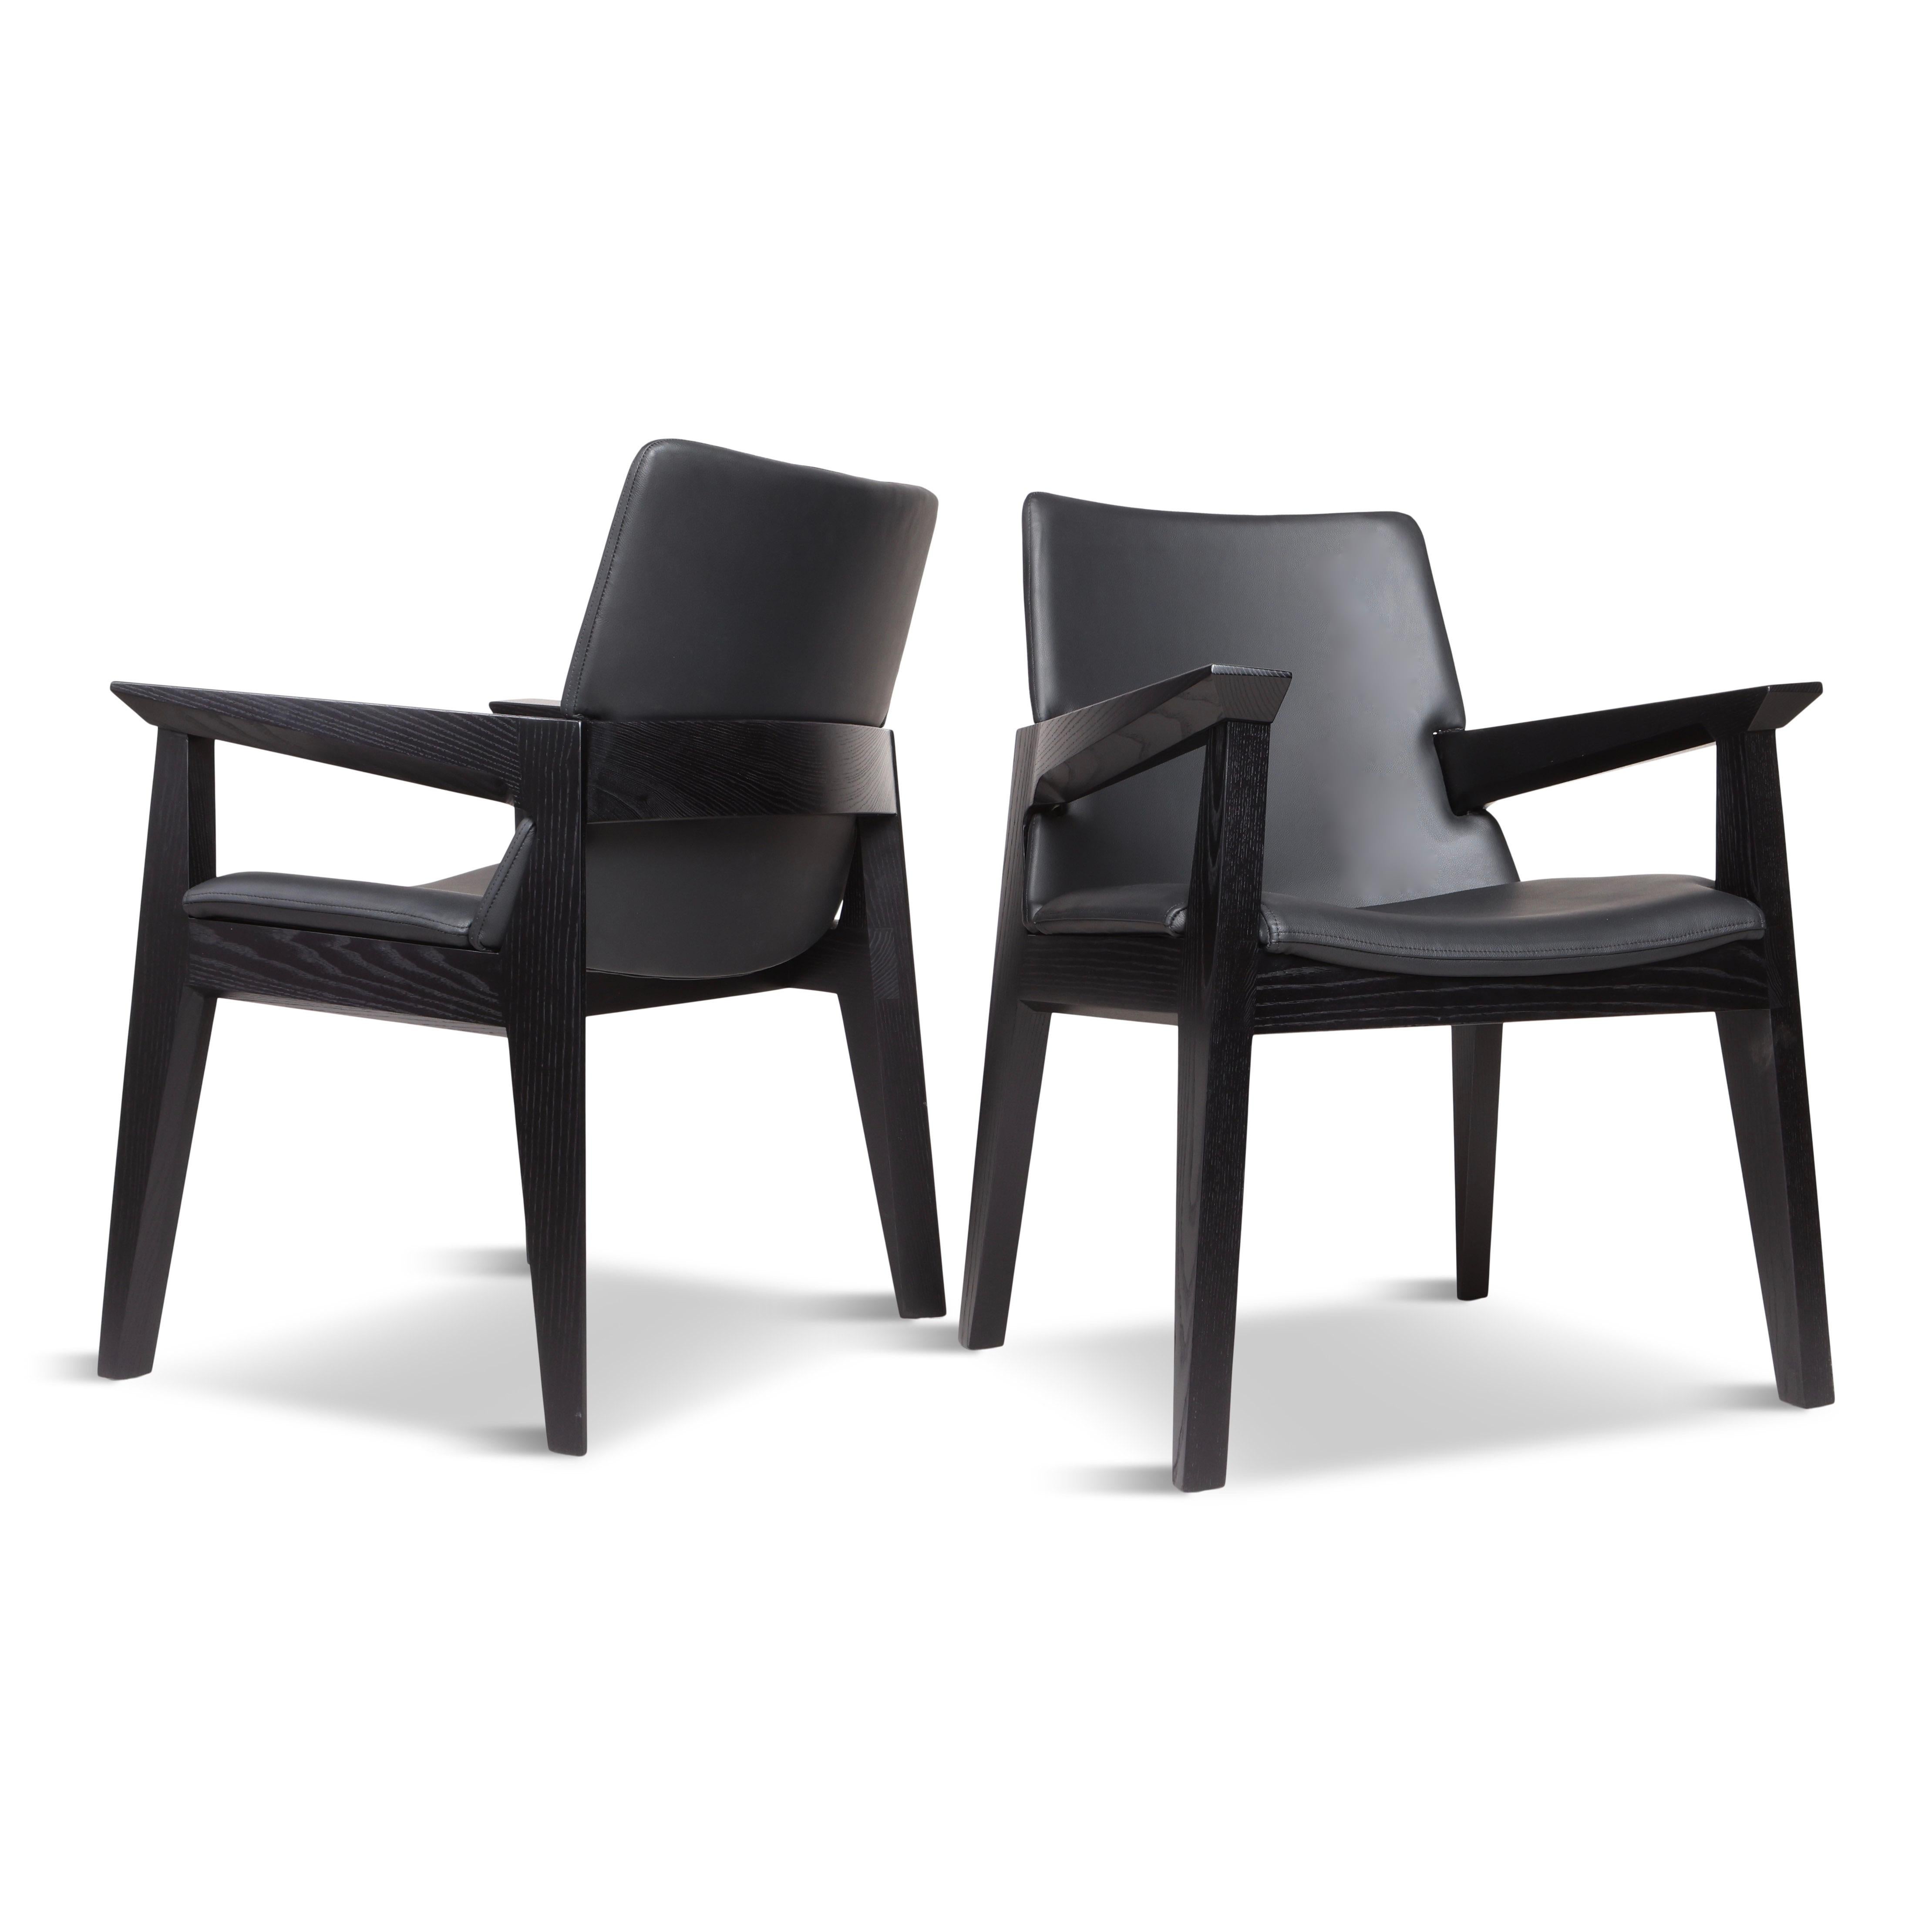 Contemporary Solid Wood and Leather Arm Chair, Kroft Dining Chair